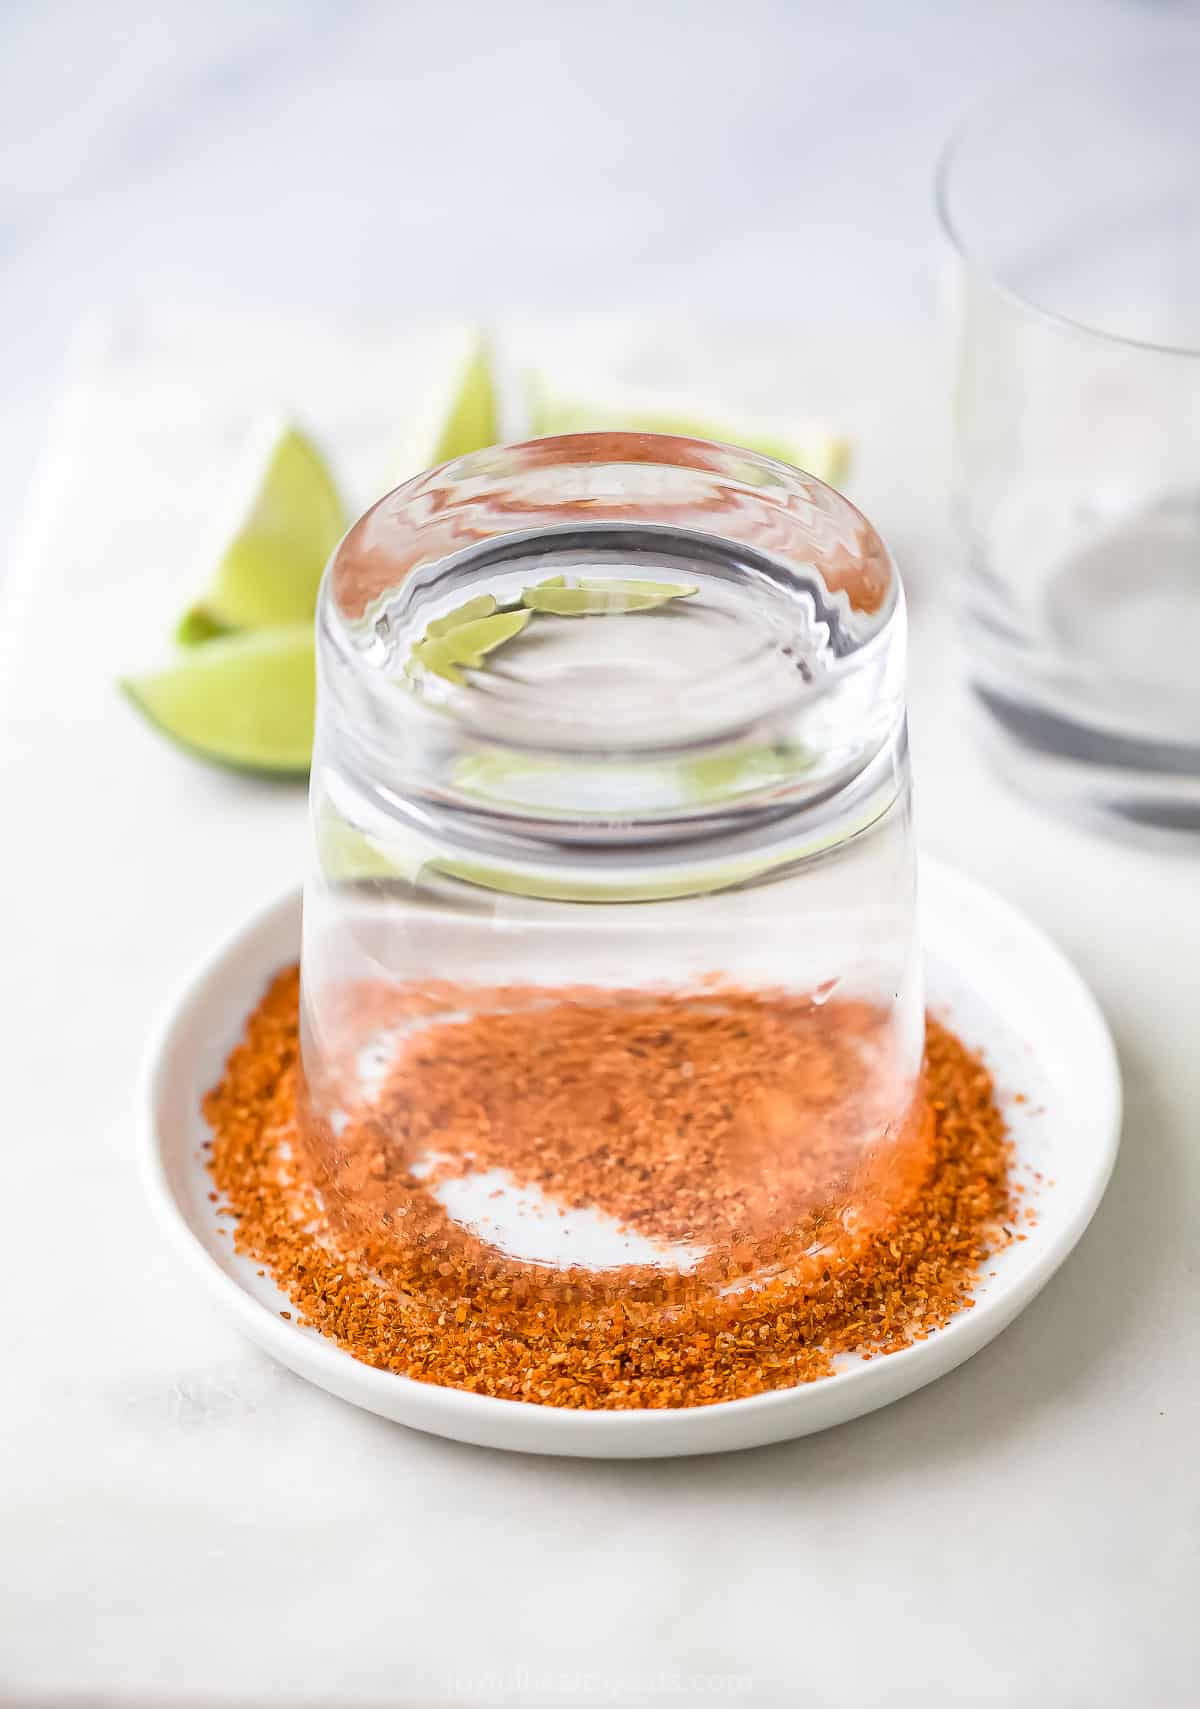 A cocktail glass set rim-down on a plate full of tajín seasoning with fresh lime wedges in the background